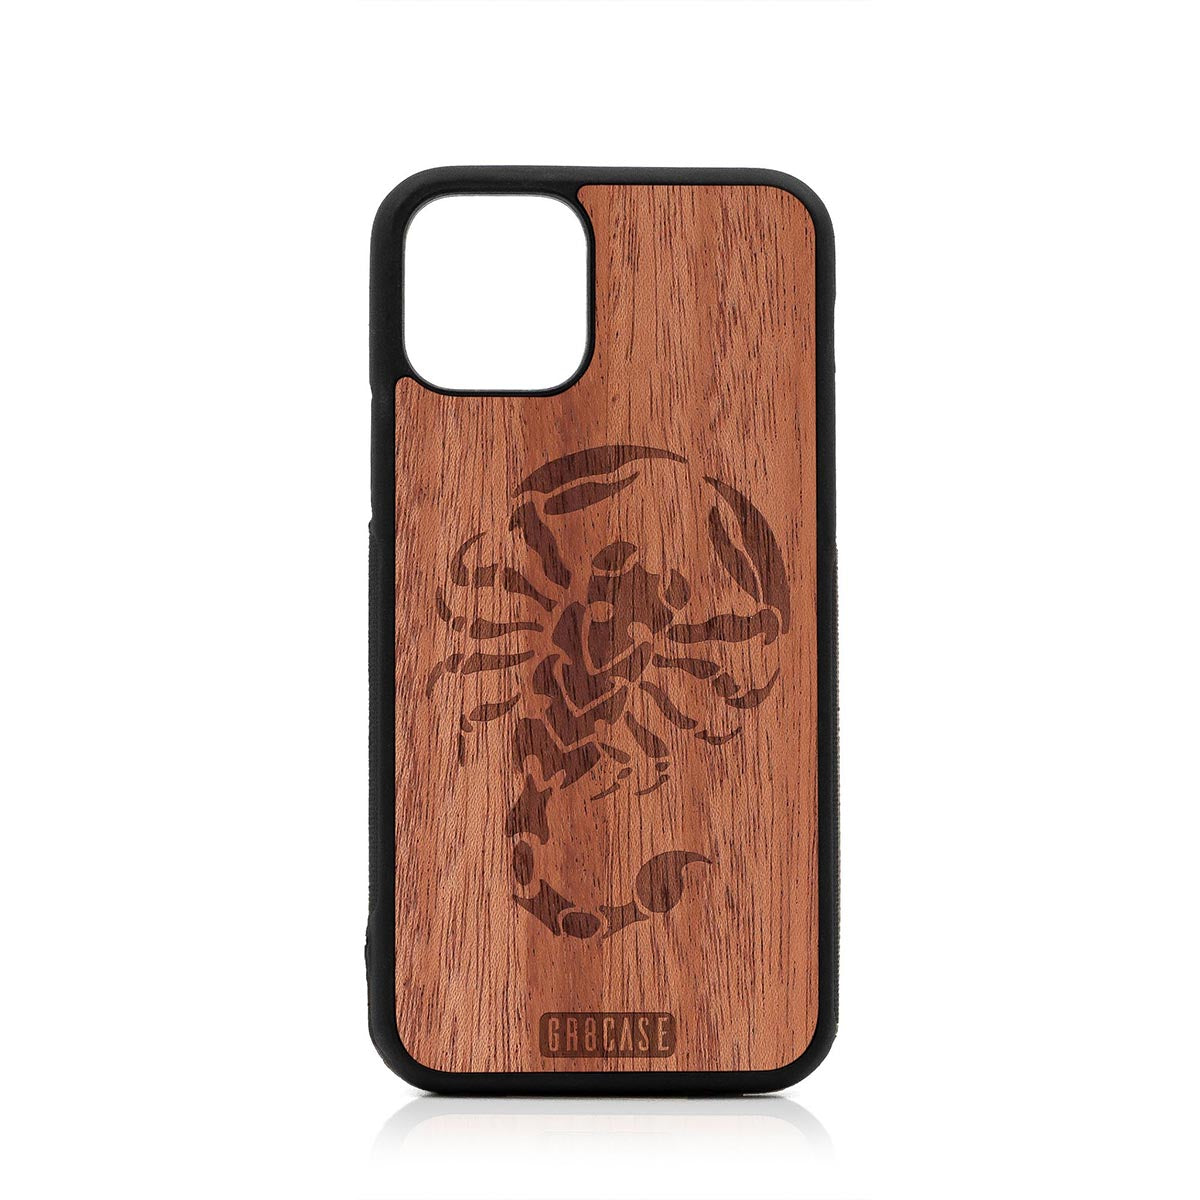 Scorpion Design Wood Case For iPhone 11 Pro by GR8CASE